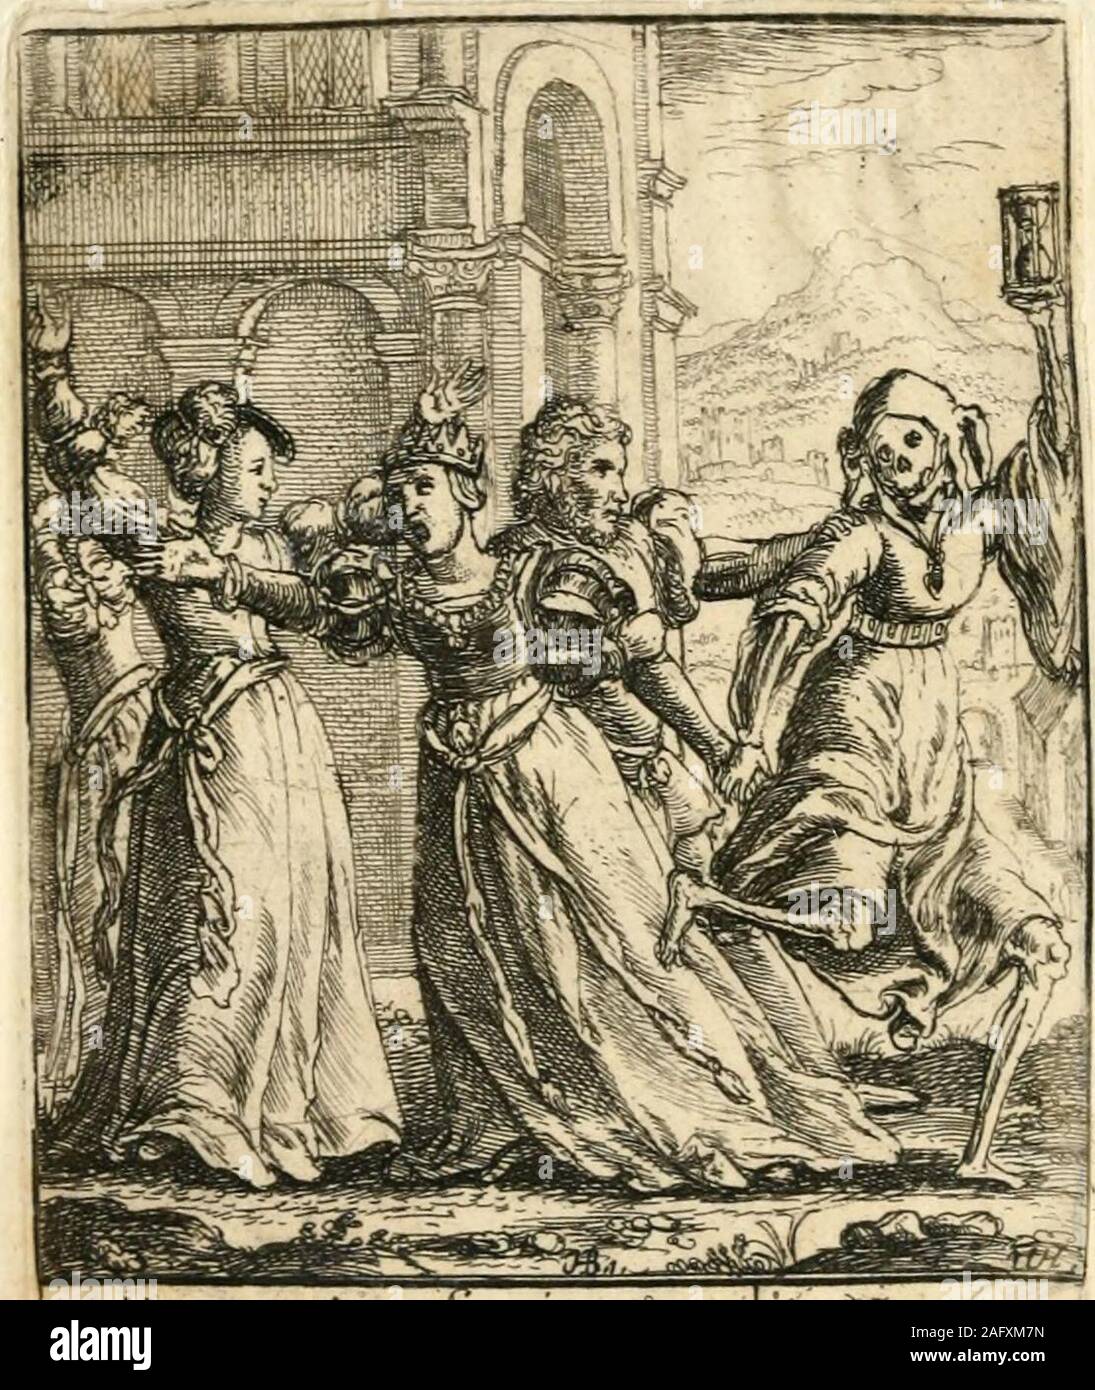 . The dance of death. Gra^Uenie* an iuperJ^ia:- poieA r&gt;r-. Zs-M- T^, 49 THE QUEEN. VIII. She is walking out from her palace, accom-panied by two of her ladies and her jester.Death, having previously despoiled the motleypersonage of his habiliments, and grotesquelydecorated himself therewith, is forcibly drag-ging away the Queen. The fool attempts in-effectually to protect her, whilst the femaleattendants join in the lamentations of theirmistress. K so THE CARDINAL. IX. HE is disposing of his indulgencies to arich offender, who brings with him a chest ofmoney. Death snatches off the Cardina Stock Photo